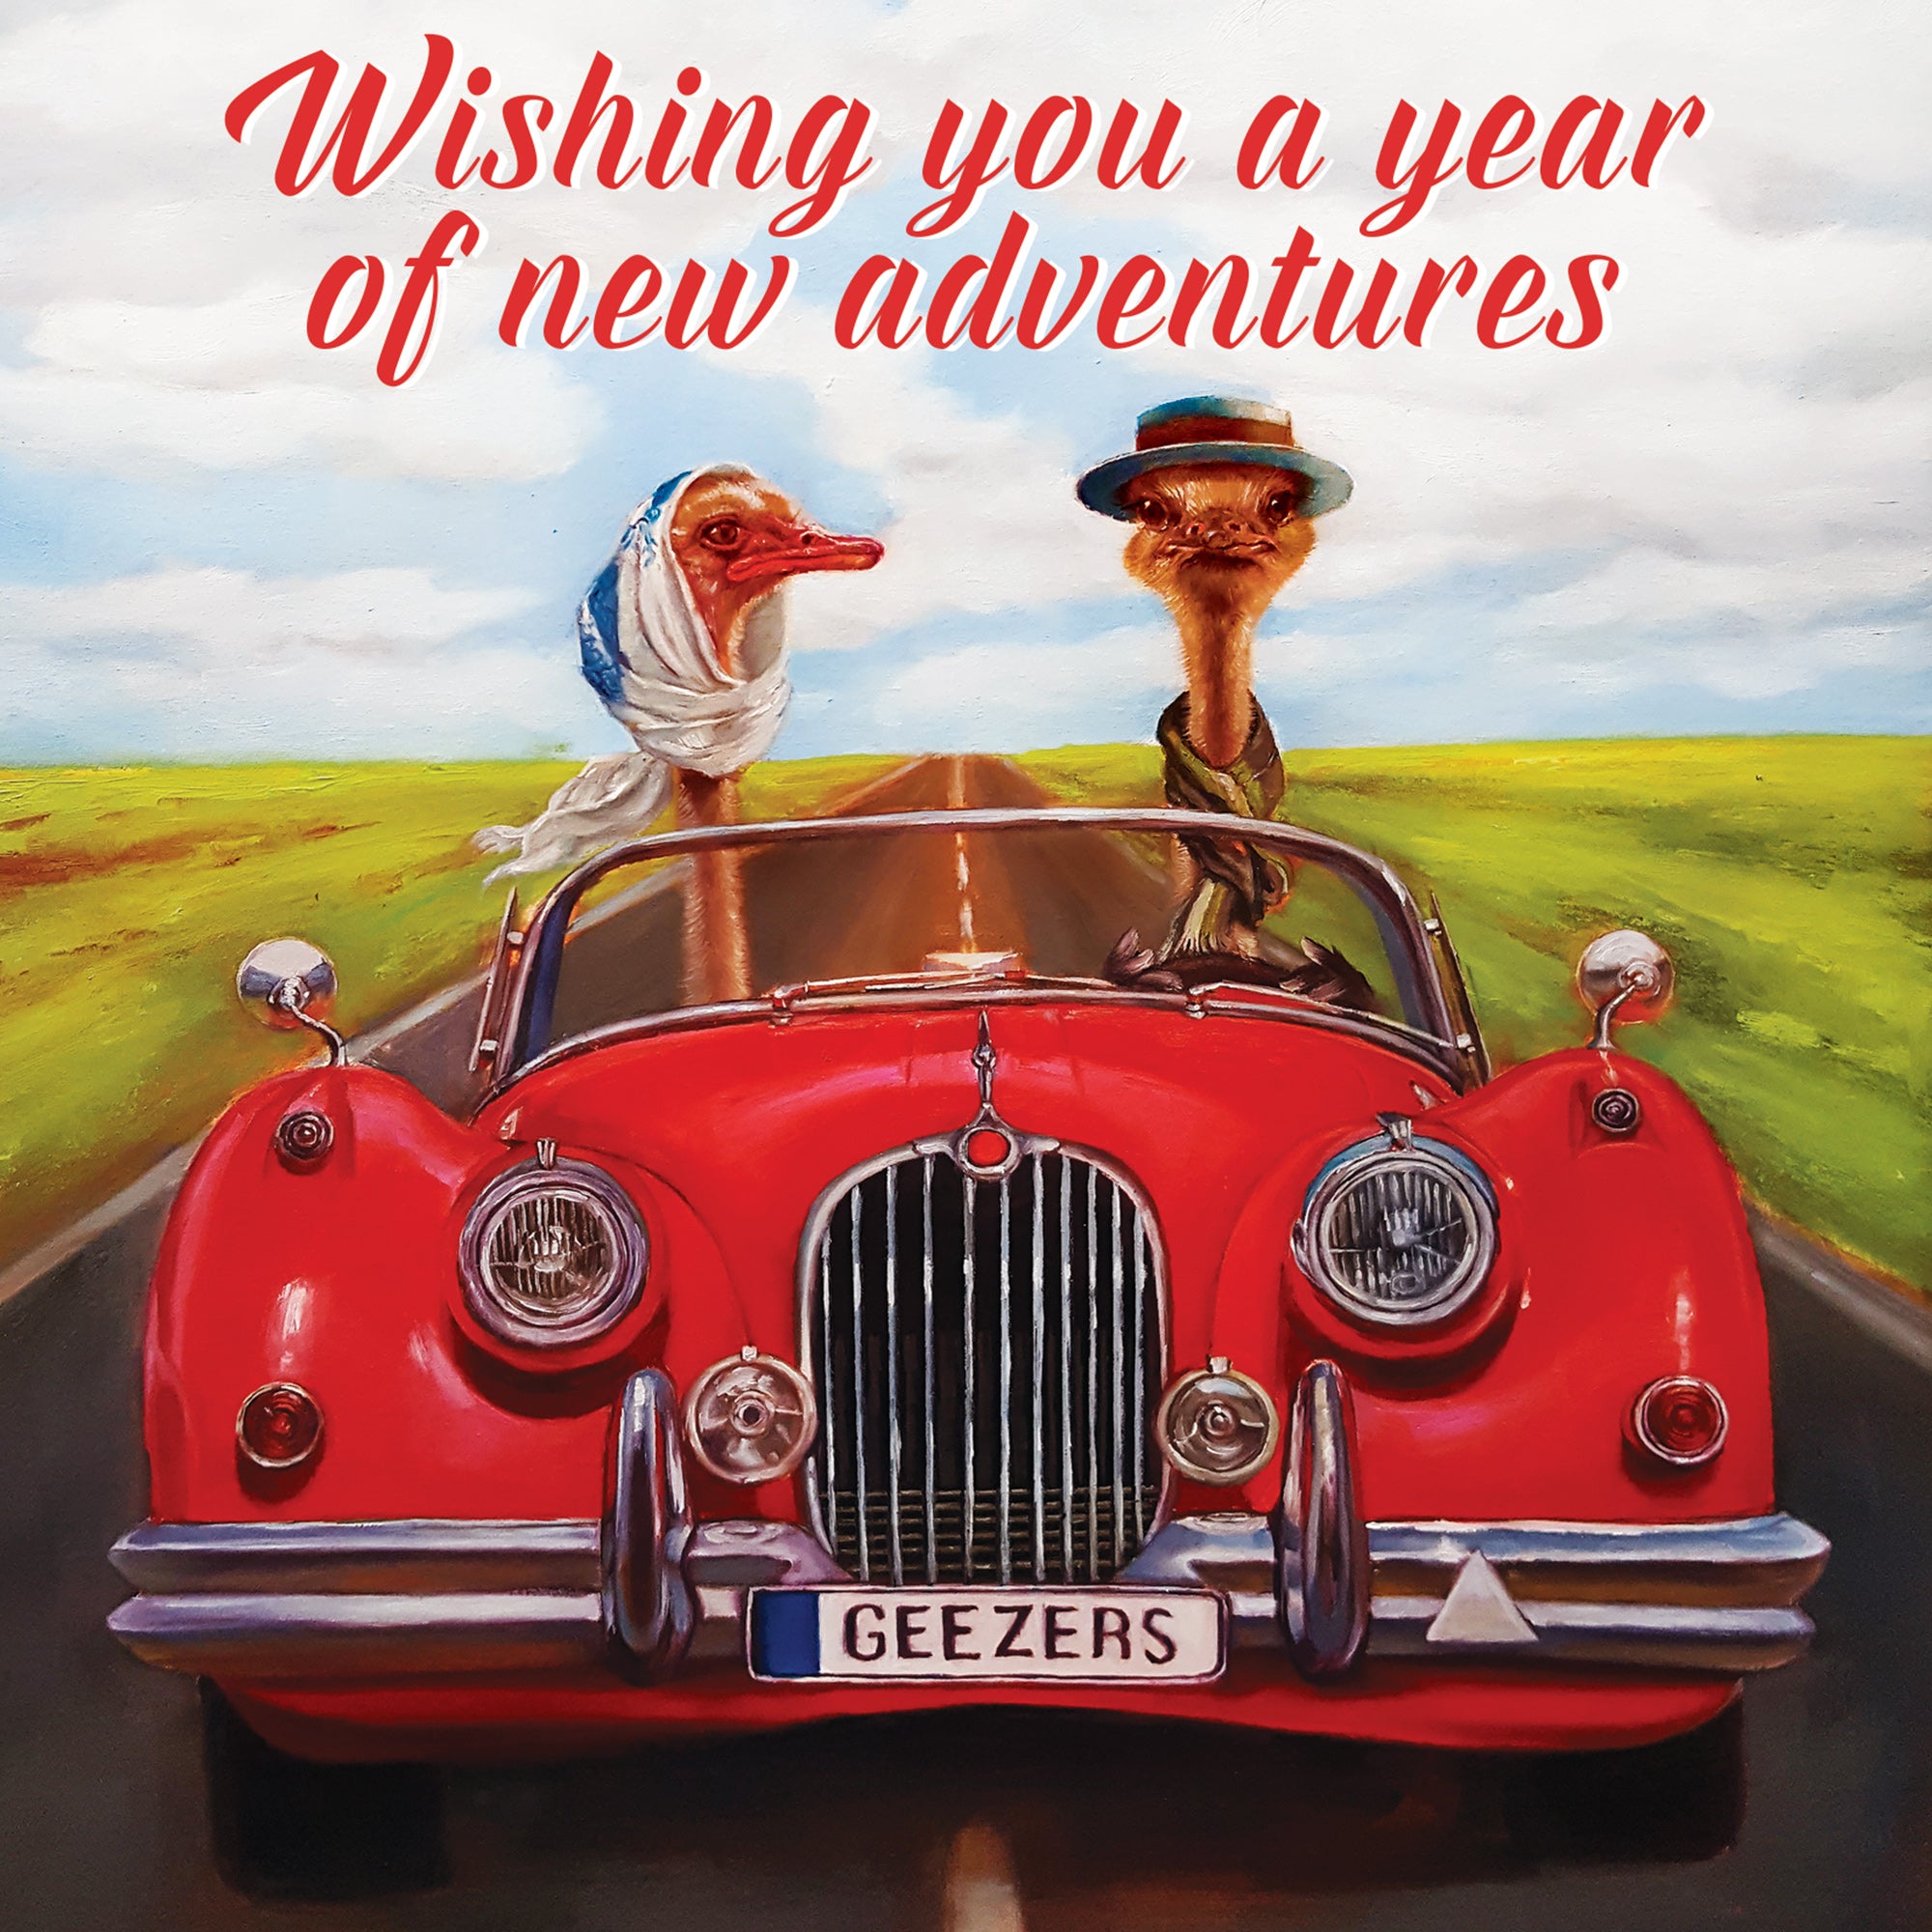 Greeting Card Years of New Adventures